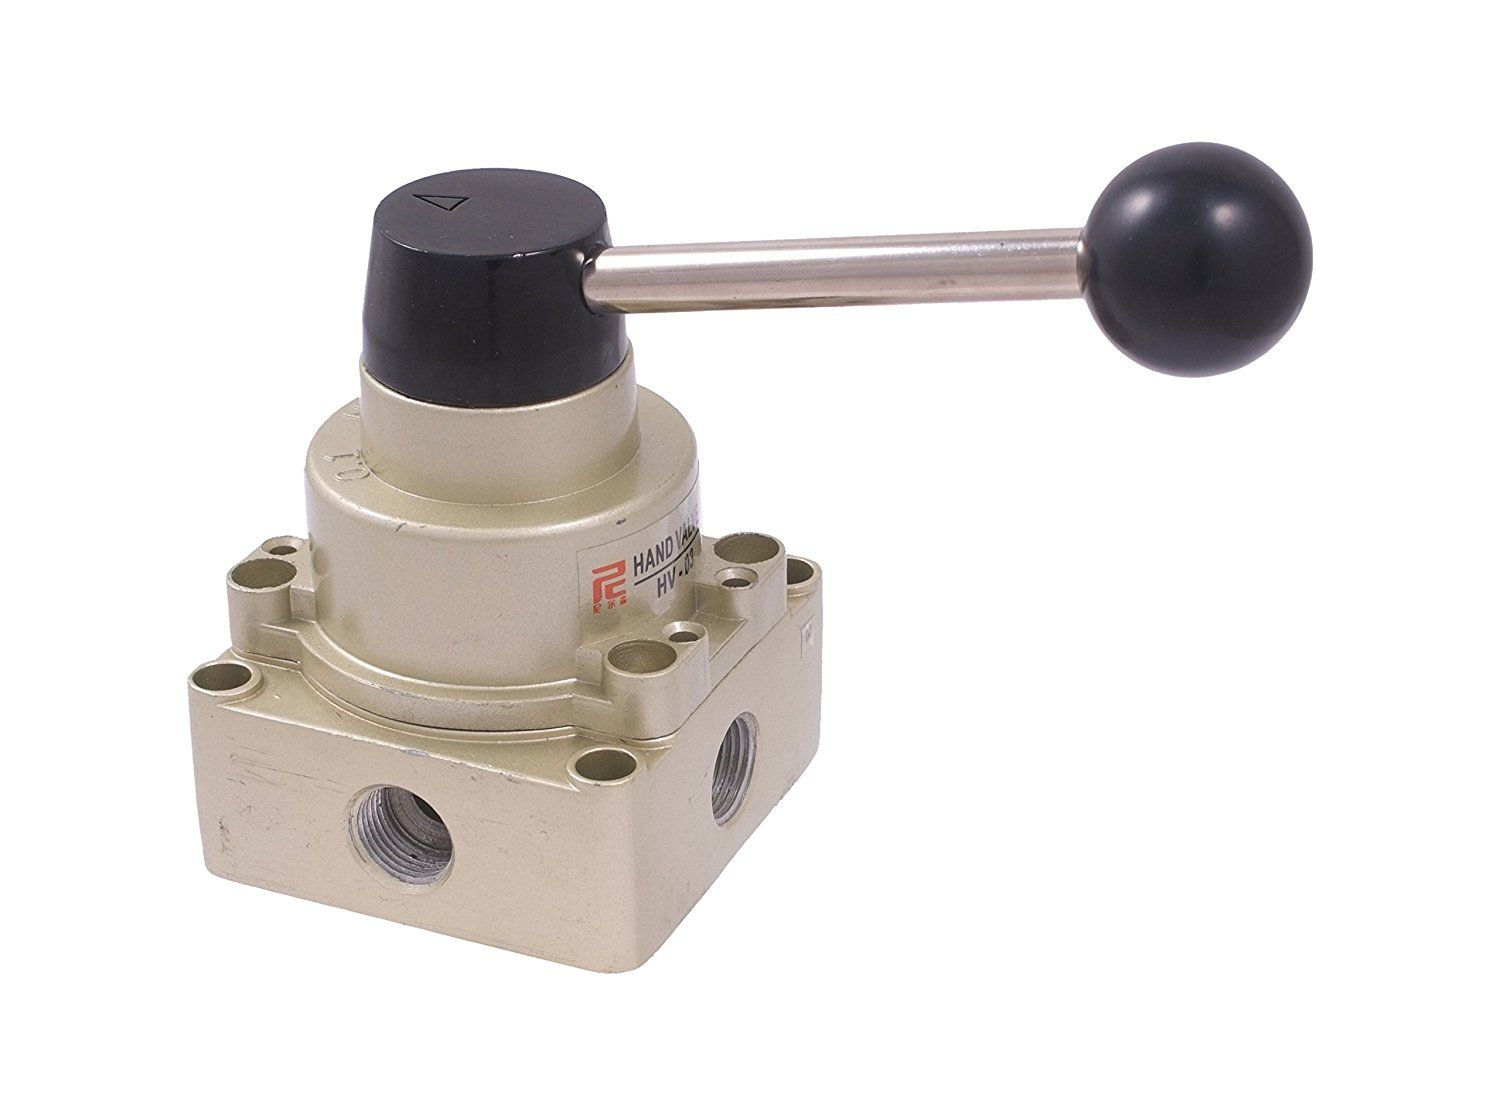 4-WAY HAND OPERATED ROTARY DISC TYPE VALVE WITH 1/2 NPT INLET (8401-0256)